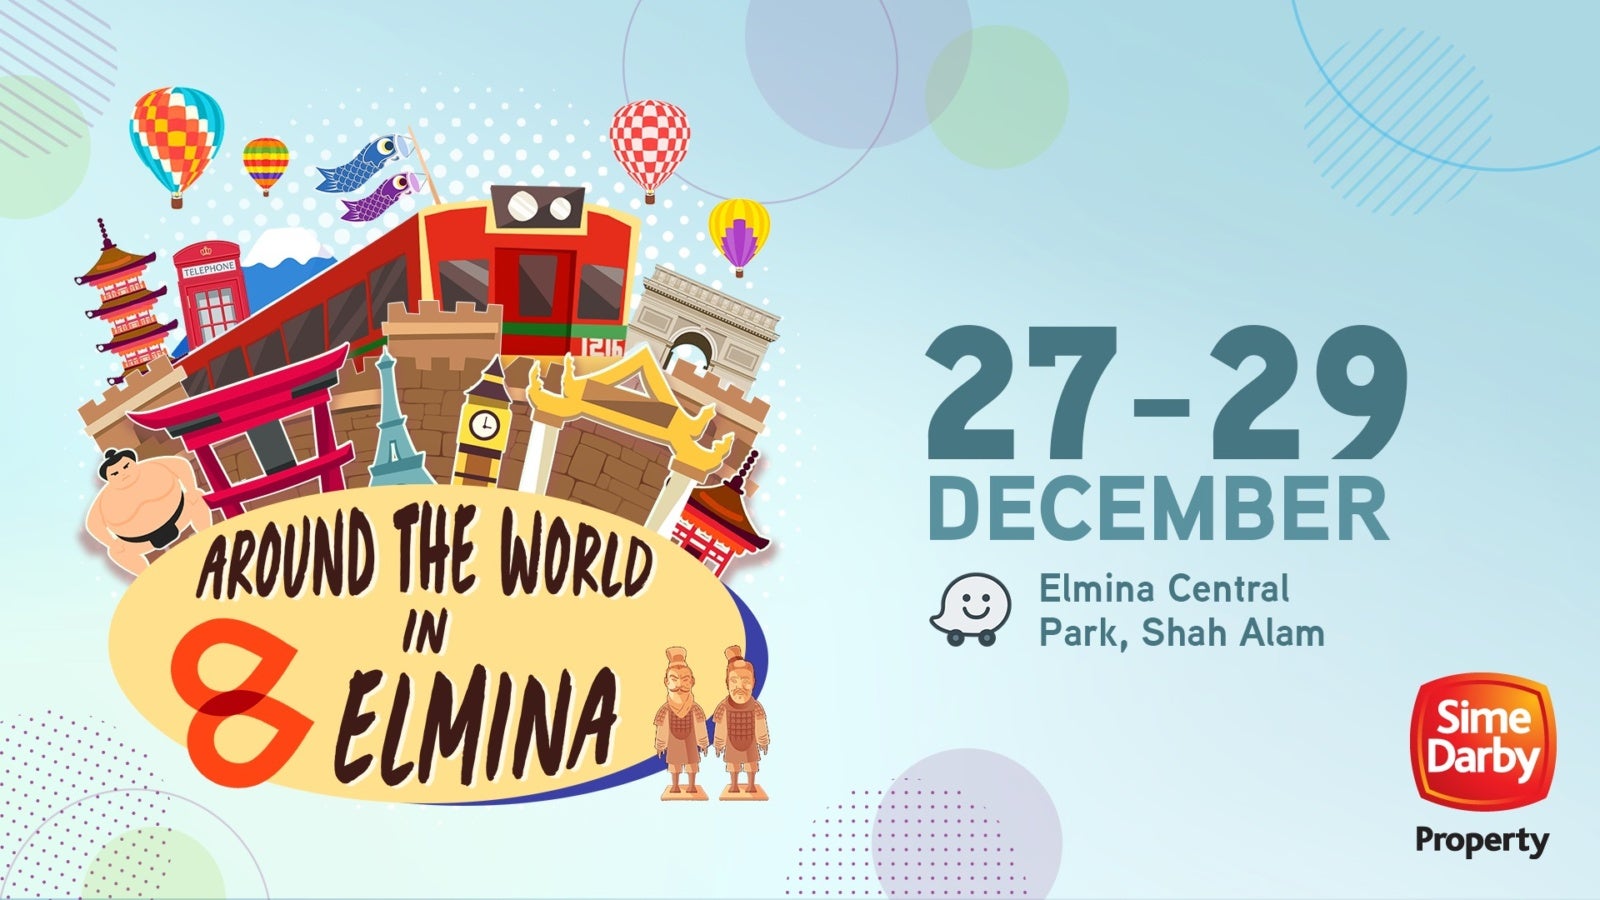 [TEST] Relive Your Holiday Memories at This City of Elmina Event Bringing Chatuchak Market, Shinjuku St. & More All to 1 Place! - WORLD OF BUZZ